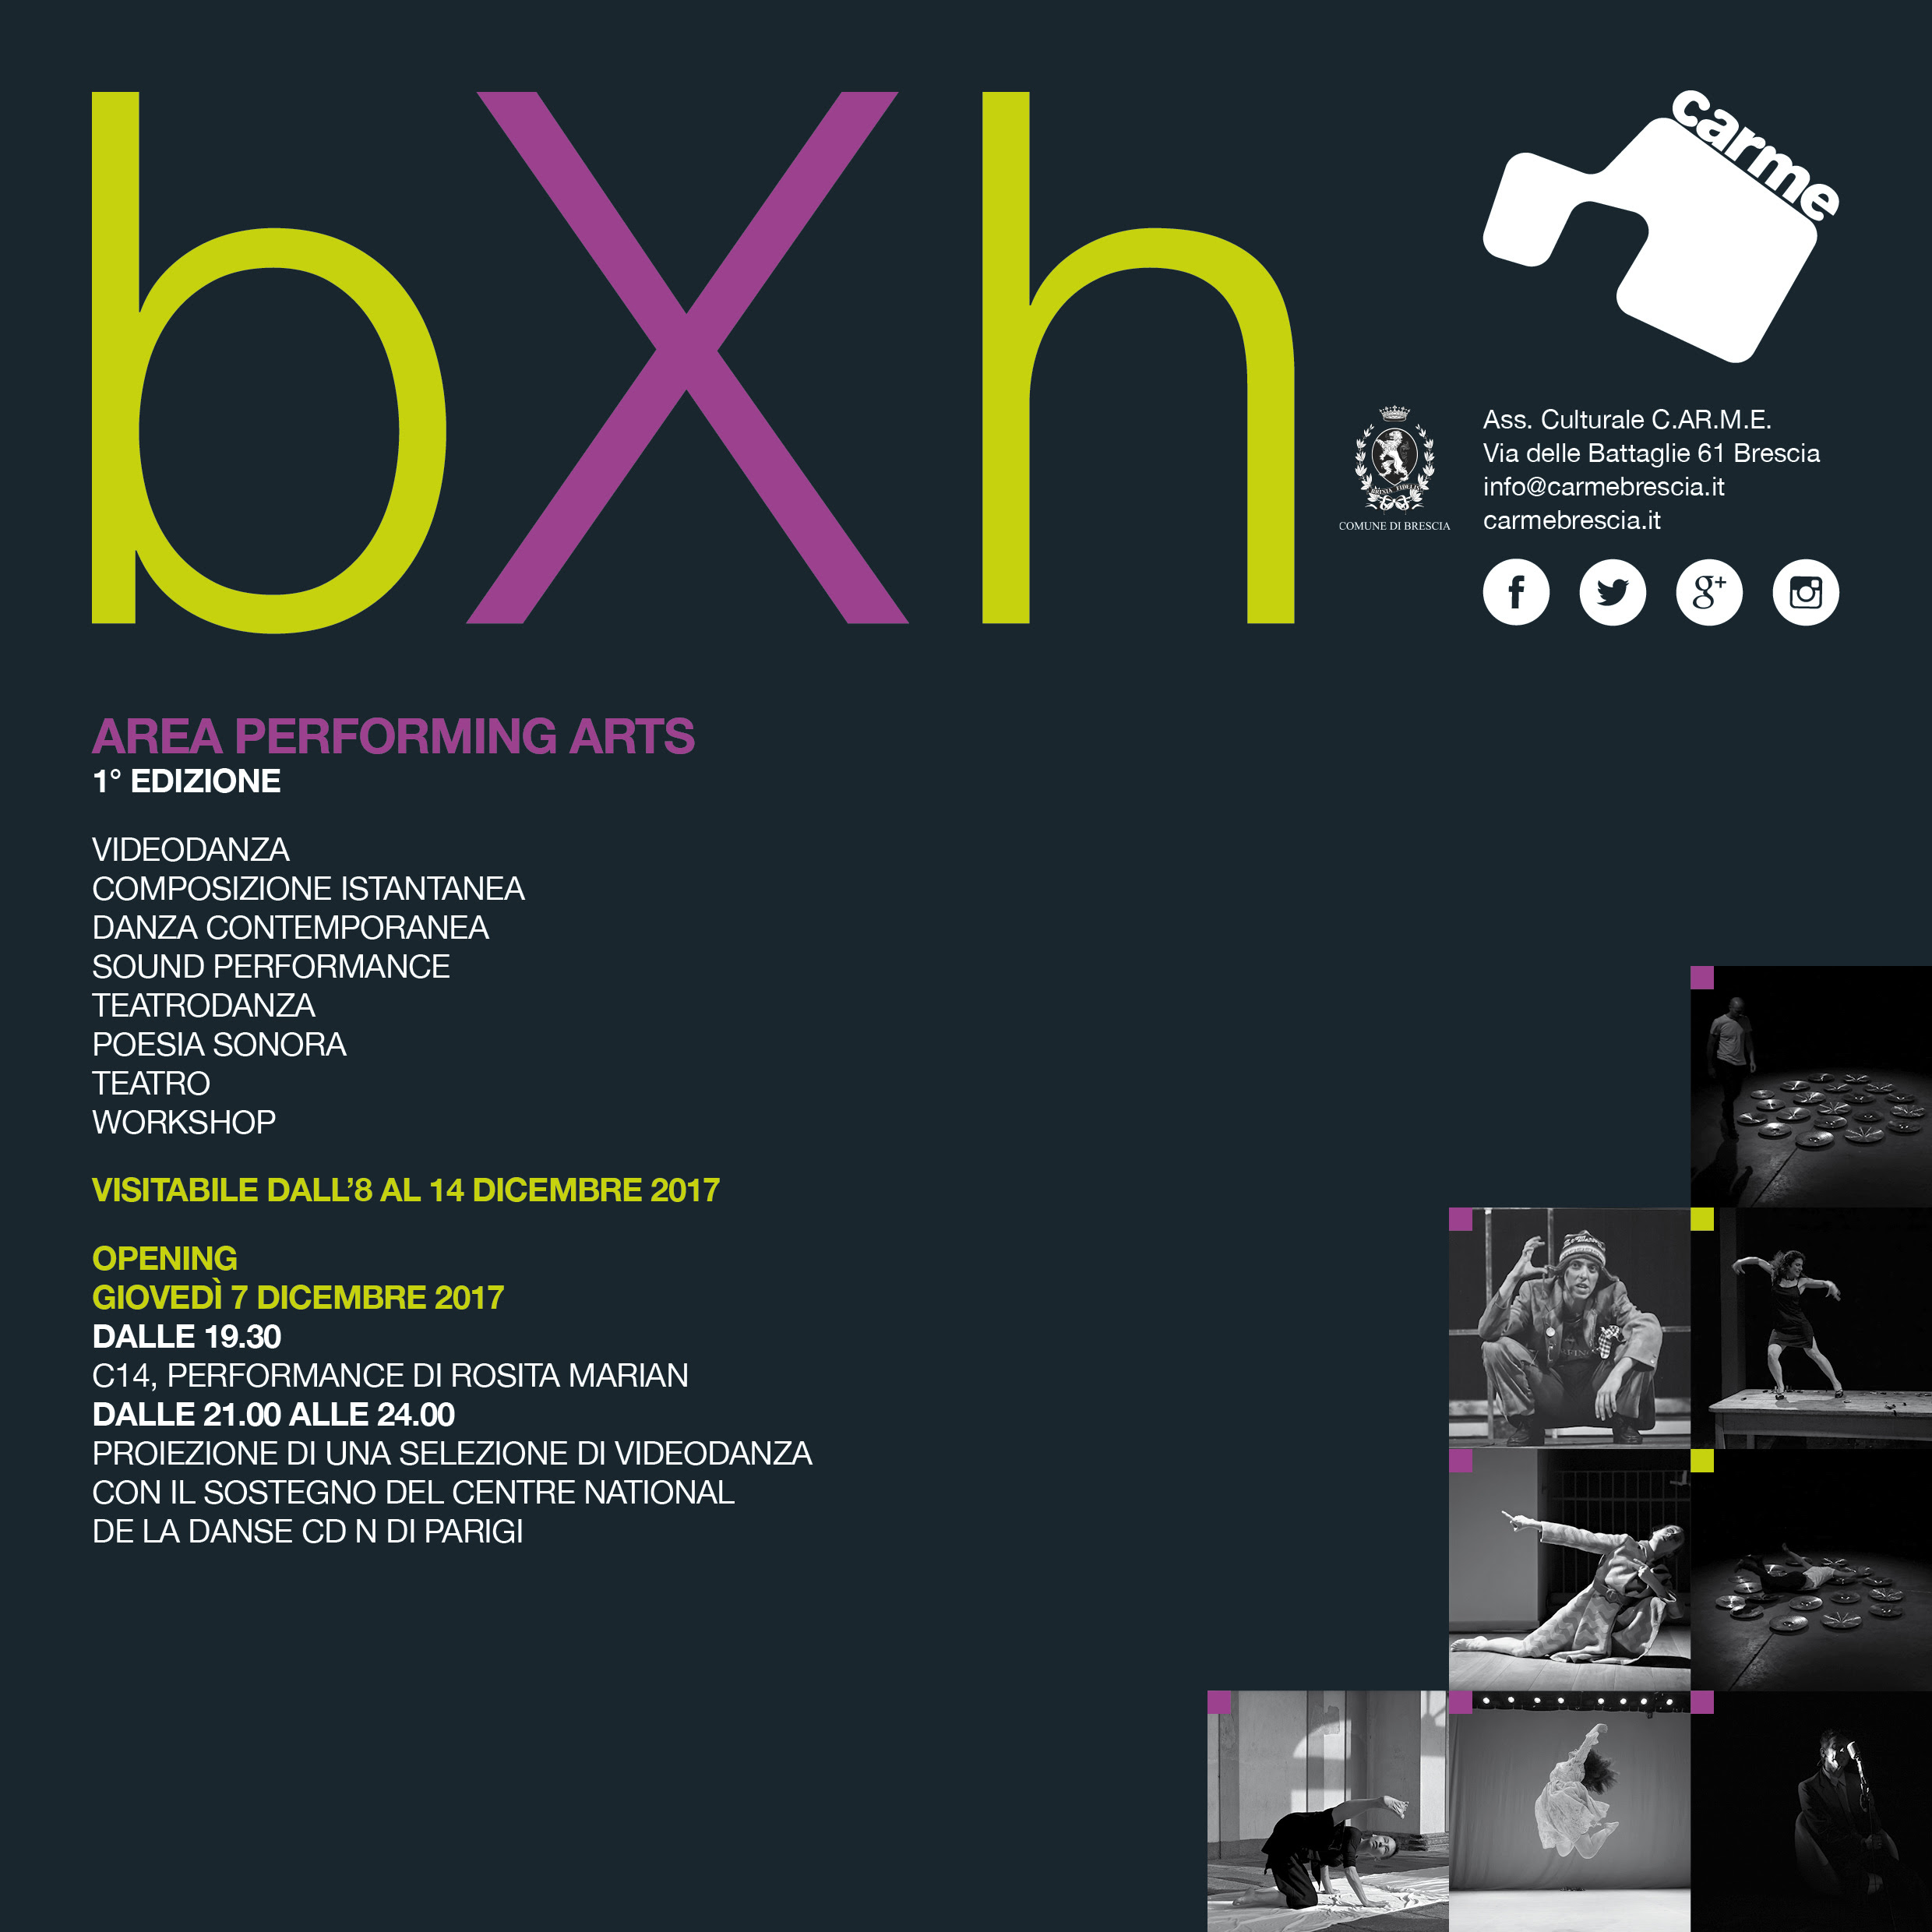 b x h area performing arts